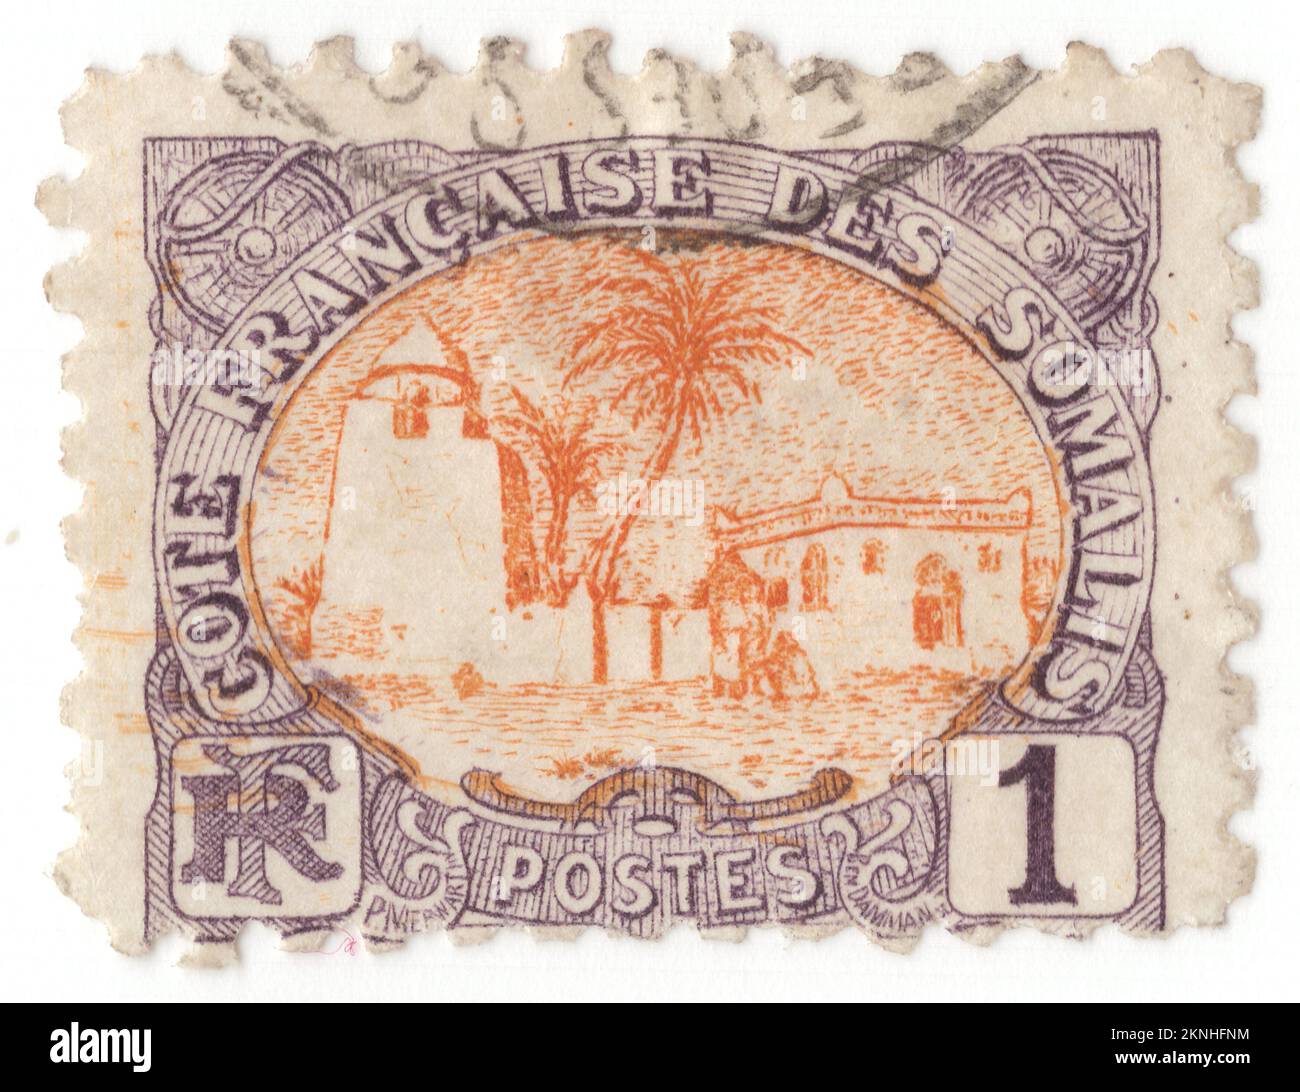 FRENCH SOMALI COAST DJIBOUTI - 1902: An 1 centime brown-violet and orange postage stamp depicting Tadjoura Mosque. Tadjoura is one of the oldest towns in Djibouti and the capital of the Tadjourah Region. The town evolved into an early Islamic center with the arrival of Muslims shortly after the Hijra. An important port for many centuries, it was ruled by a succession of polities, including the Ifat Sultanate, Adal Sultanate, the Ottoman Empire, France until Djibouti's independence in 1977. Lying on the Gulf of Tadjoura, it is home to a population of around 45,000 inhabitants Stock Photo